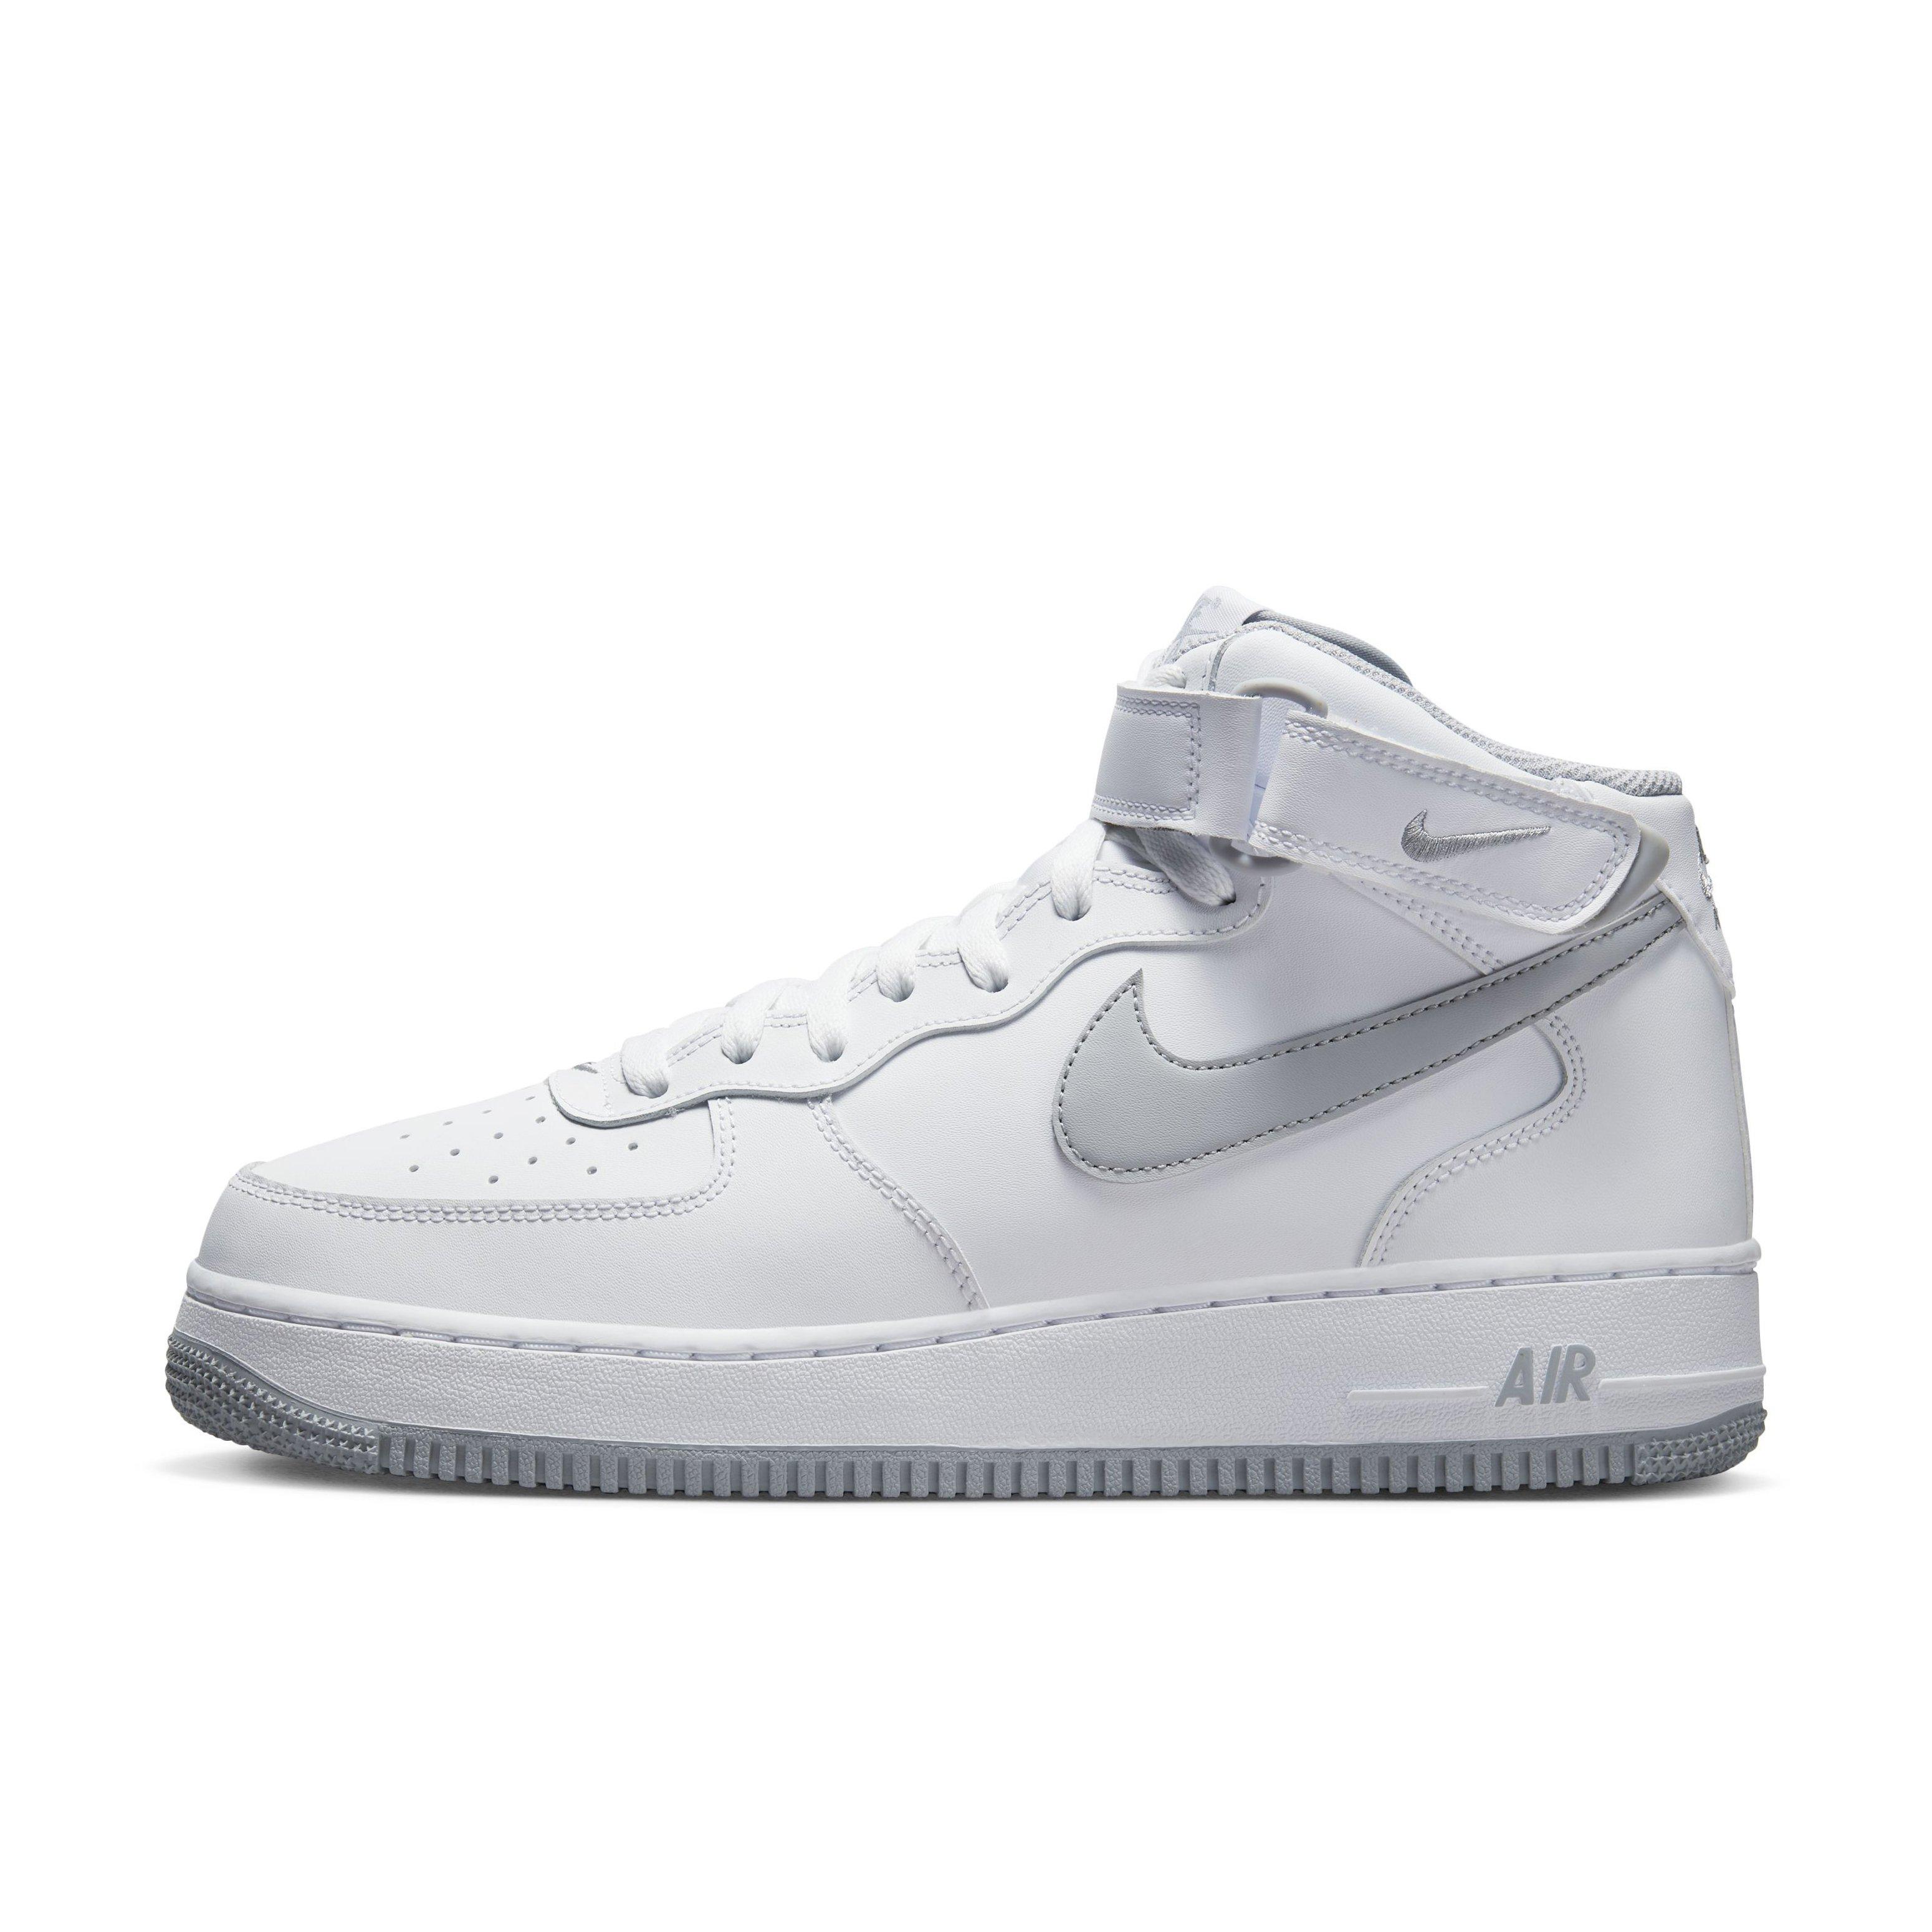 Men's shoes Nike Air Force 1 ´07 Wolf Grey/ White